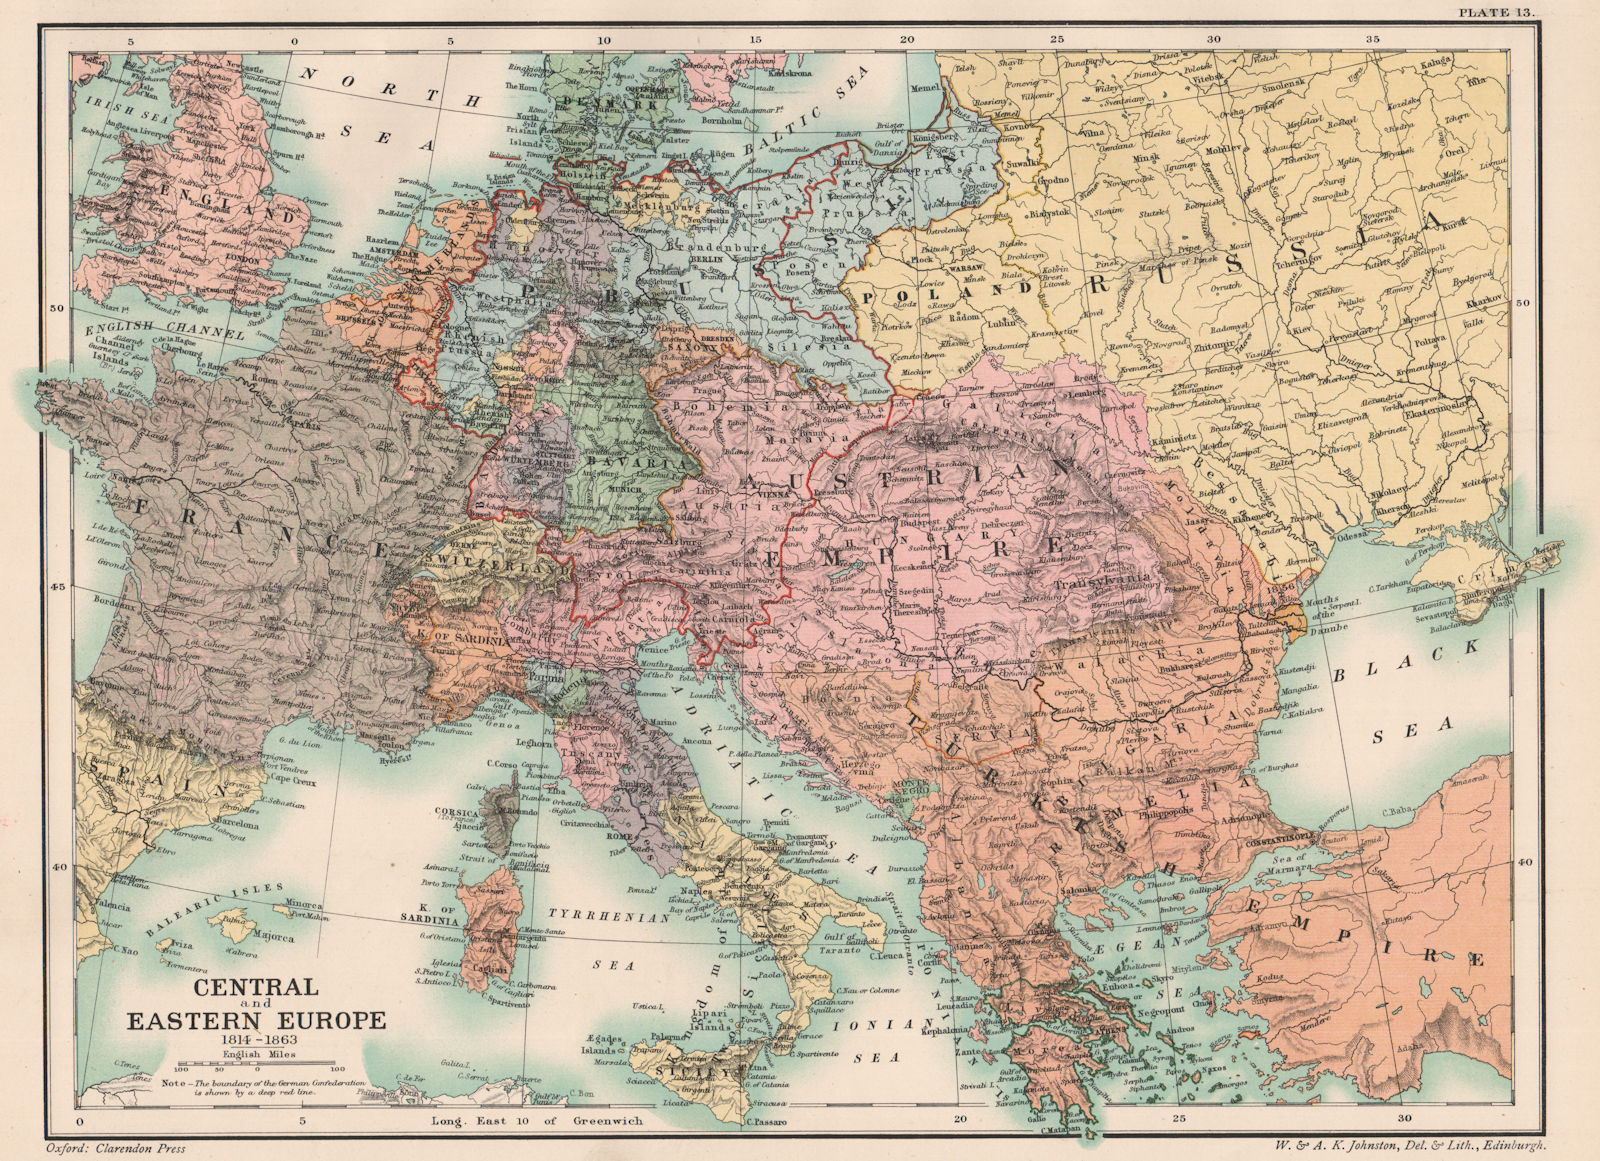 Associate Product EARLY 19TH CENTURY EUROPE. Central and Eastern Europe 1814-1863 1902 old map